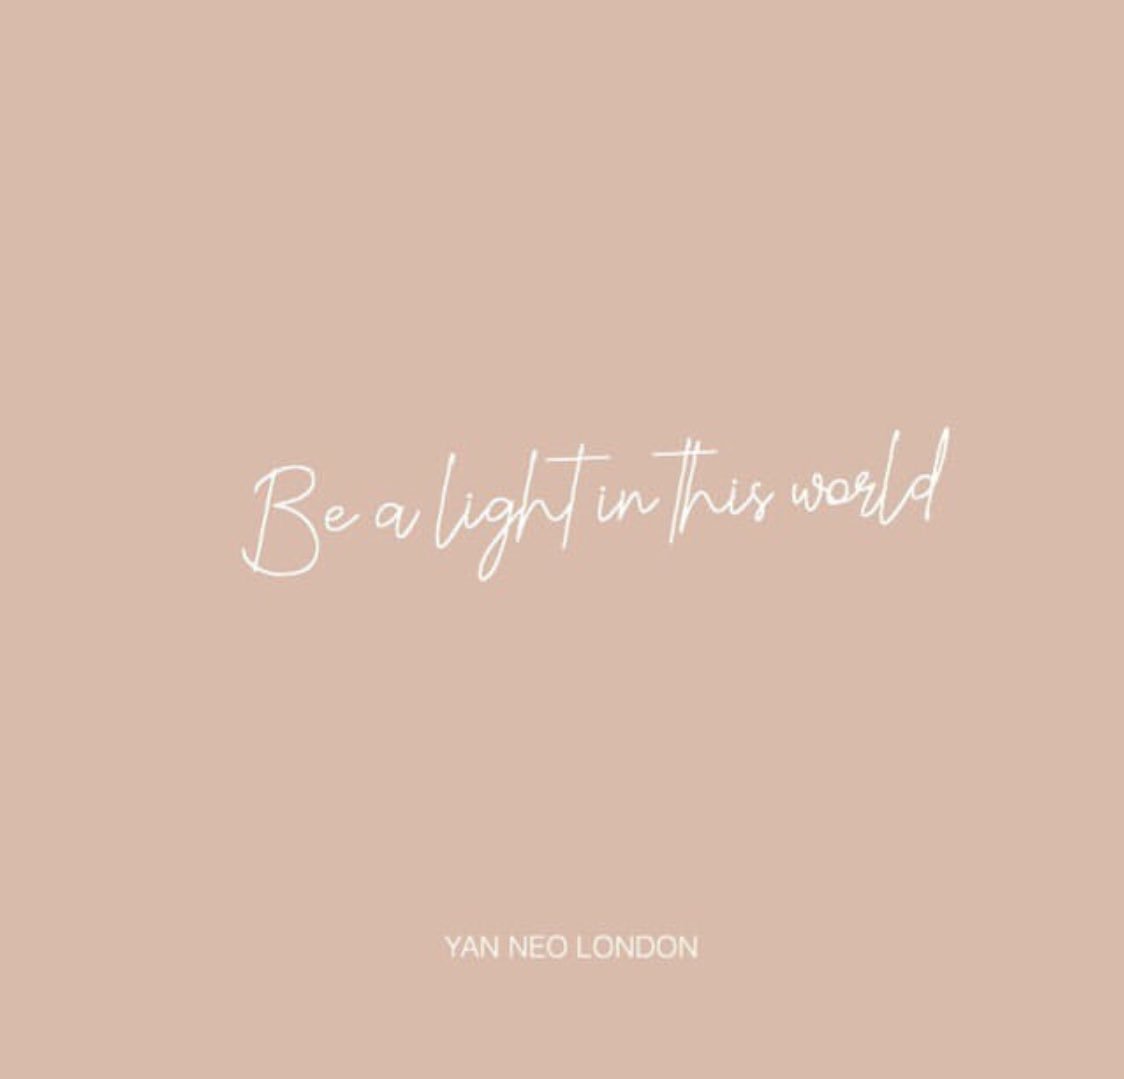 Light up your life & be your own glow! 💡💡✨✨ #yanneoofficial .
.
#mondaythoughts 
#quoteoftheday #quoteit #quoteinspo #neutralpalette #neutralaesthetic #nudetones #motivationalquote #motivating #quoteinspo #inspoquote #inspiring #inspocafe #inspodaily #quotes #love #life